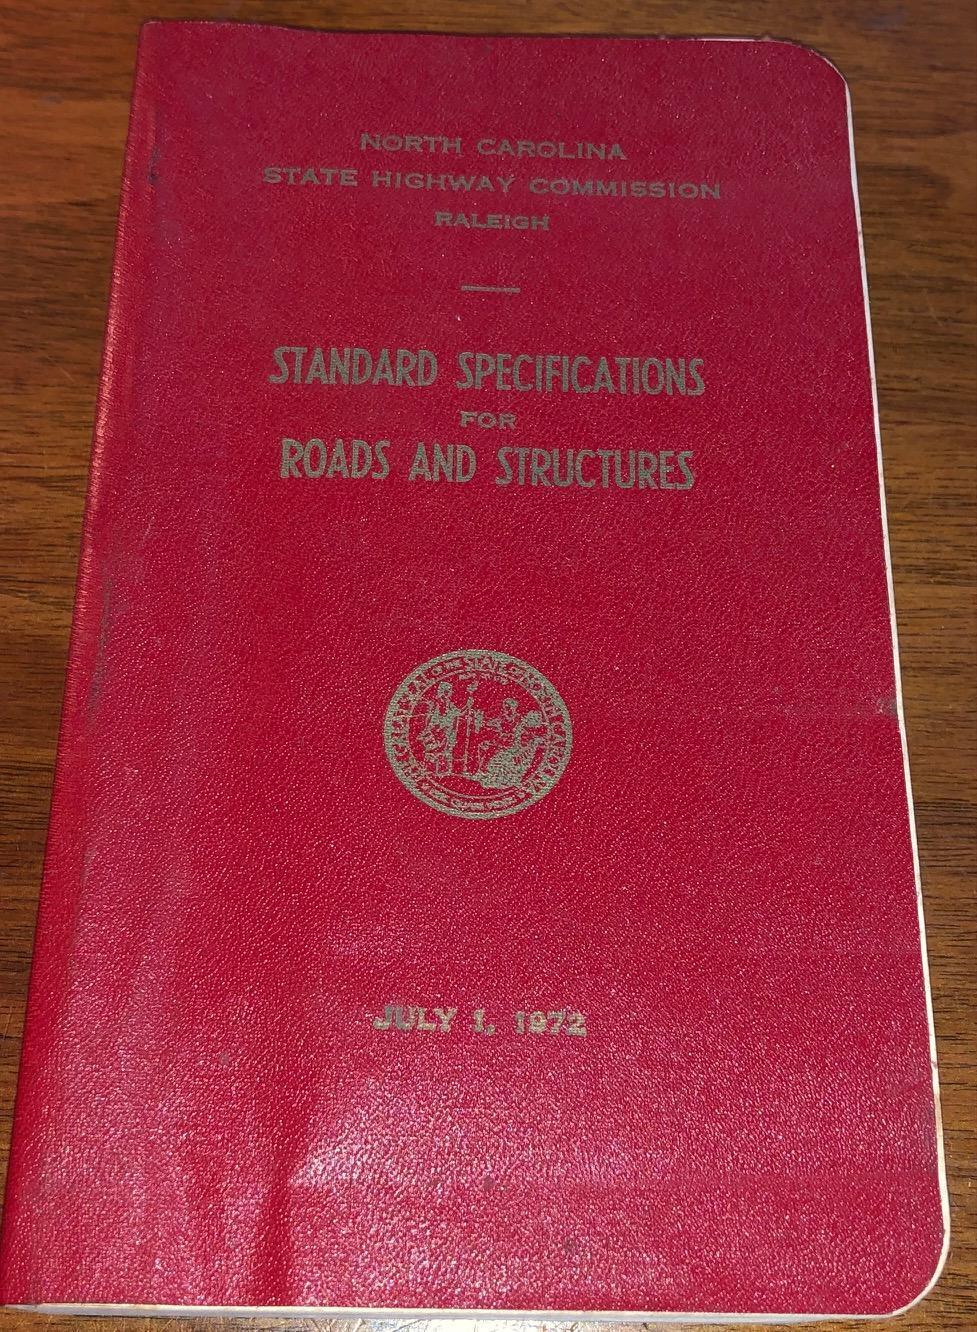 1972 North Carolina Highway Commission Standard Specifications Roads Structures